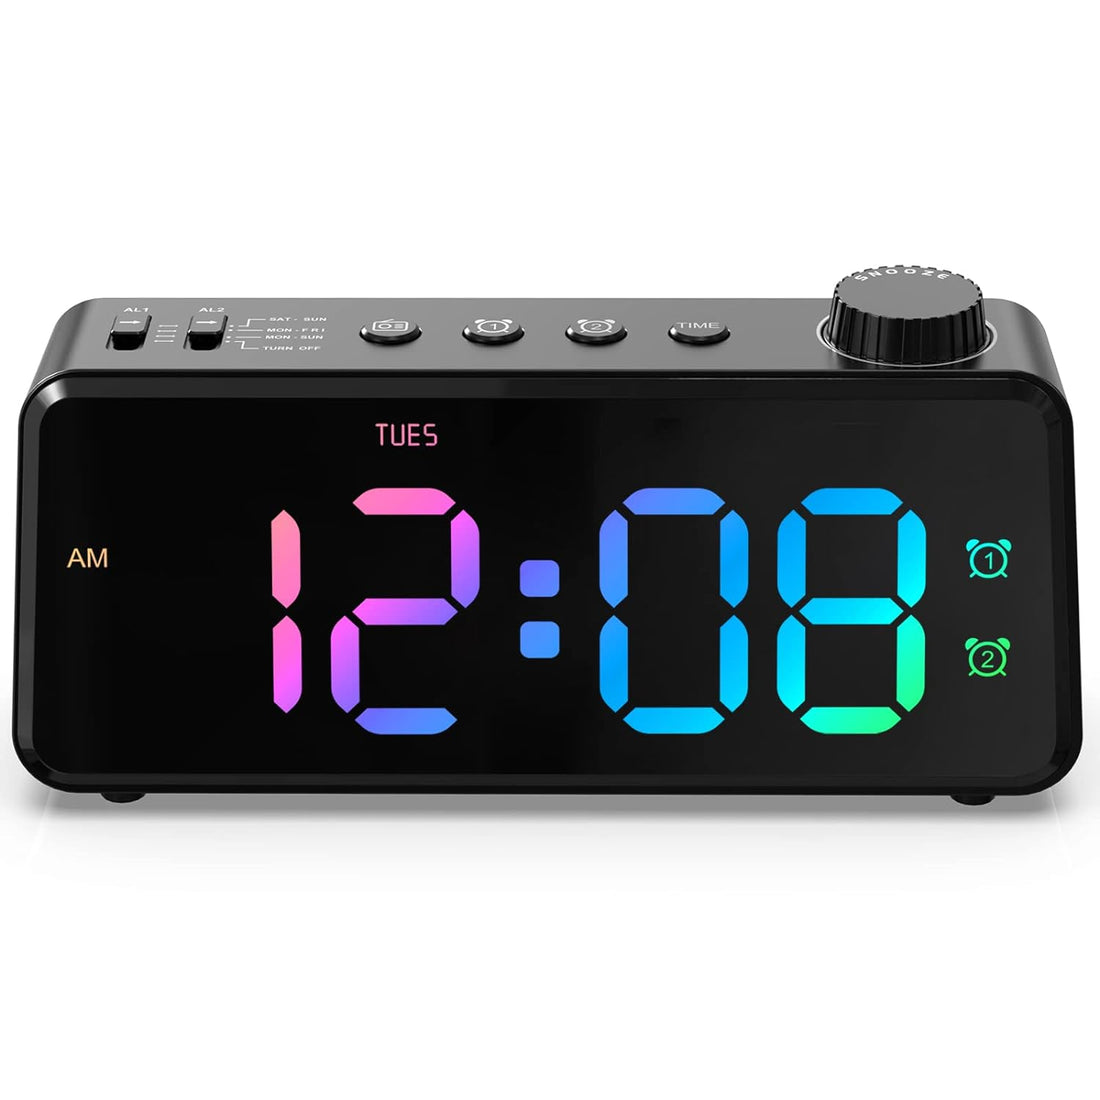 ANJANK Digital FM Radio Alarm Clock for Bedroom, 6‘5’‘ Large Colorful Display for Kids Teens, 2 Alarms with 3 Wake-Up Modes, 0-100% Dimmable Brightness, Small Desk Clock with USB Charging Port